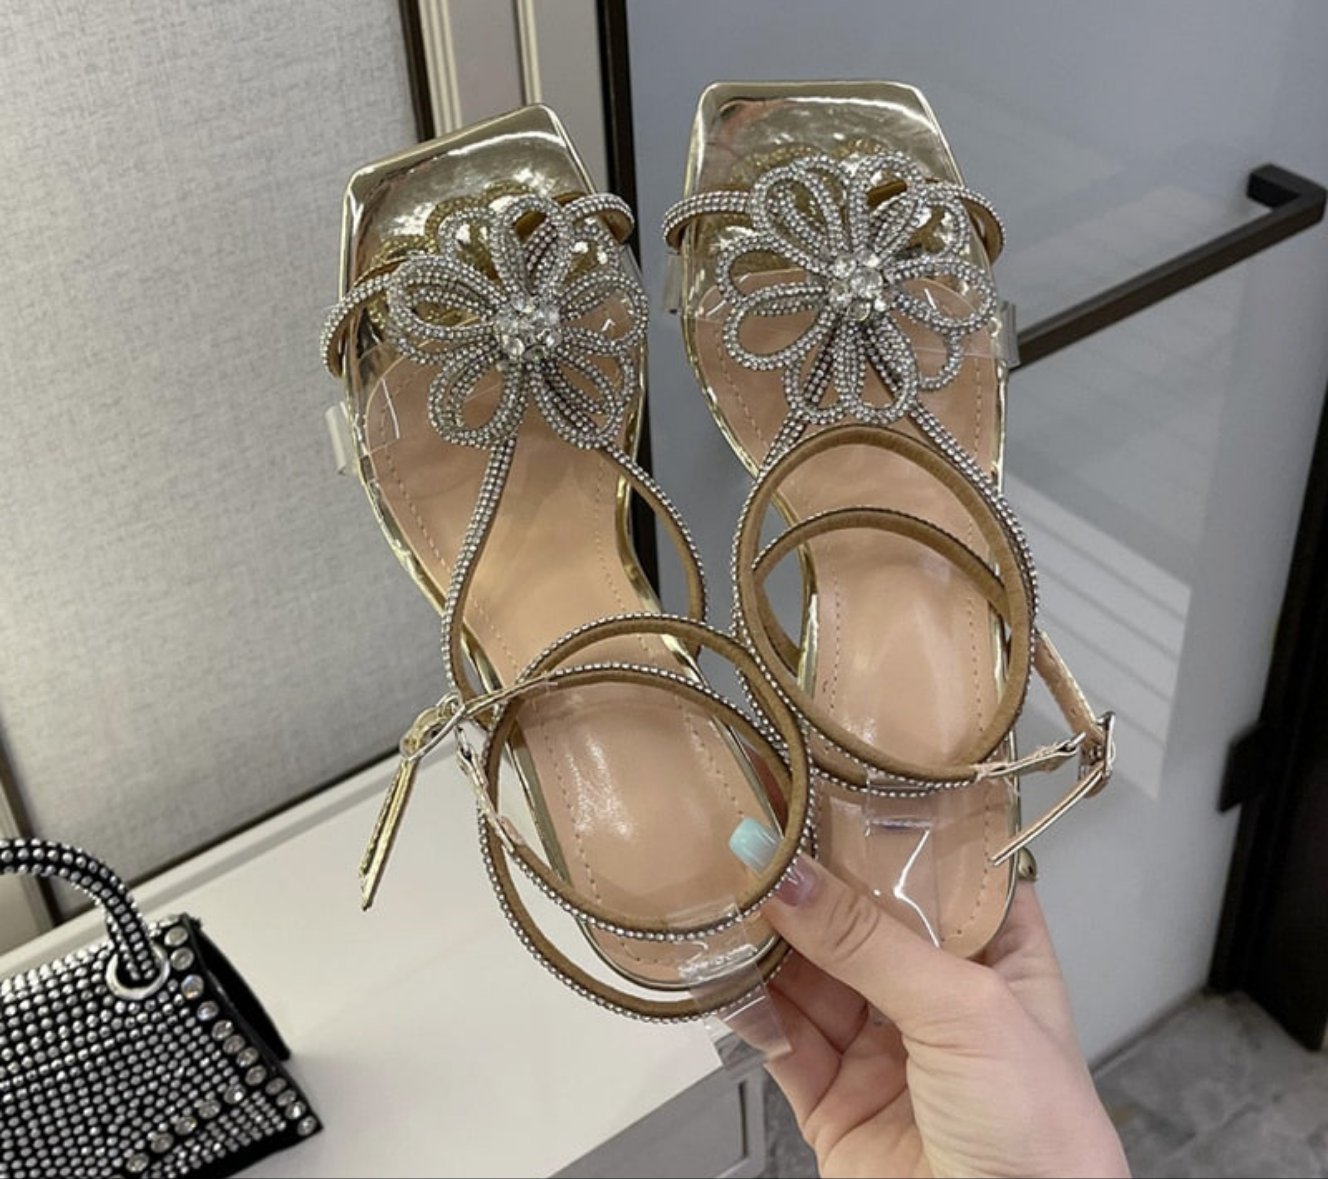 New Glitter Crystal Flowers Summer Women Sandals Gold Pink Rhinestone Ankle Strap Wedding Shoes High Heels Party Pumps